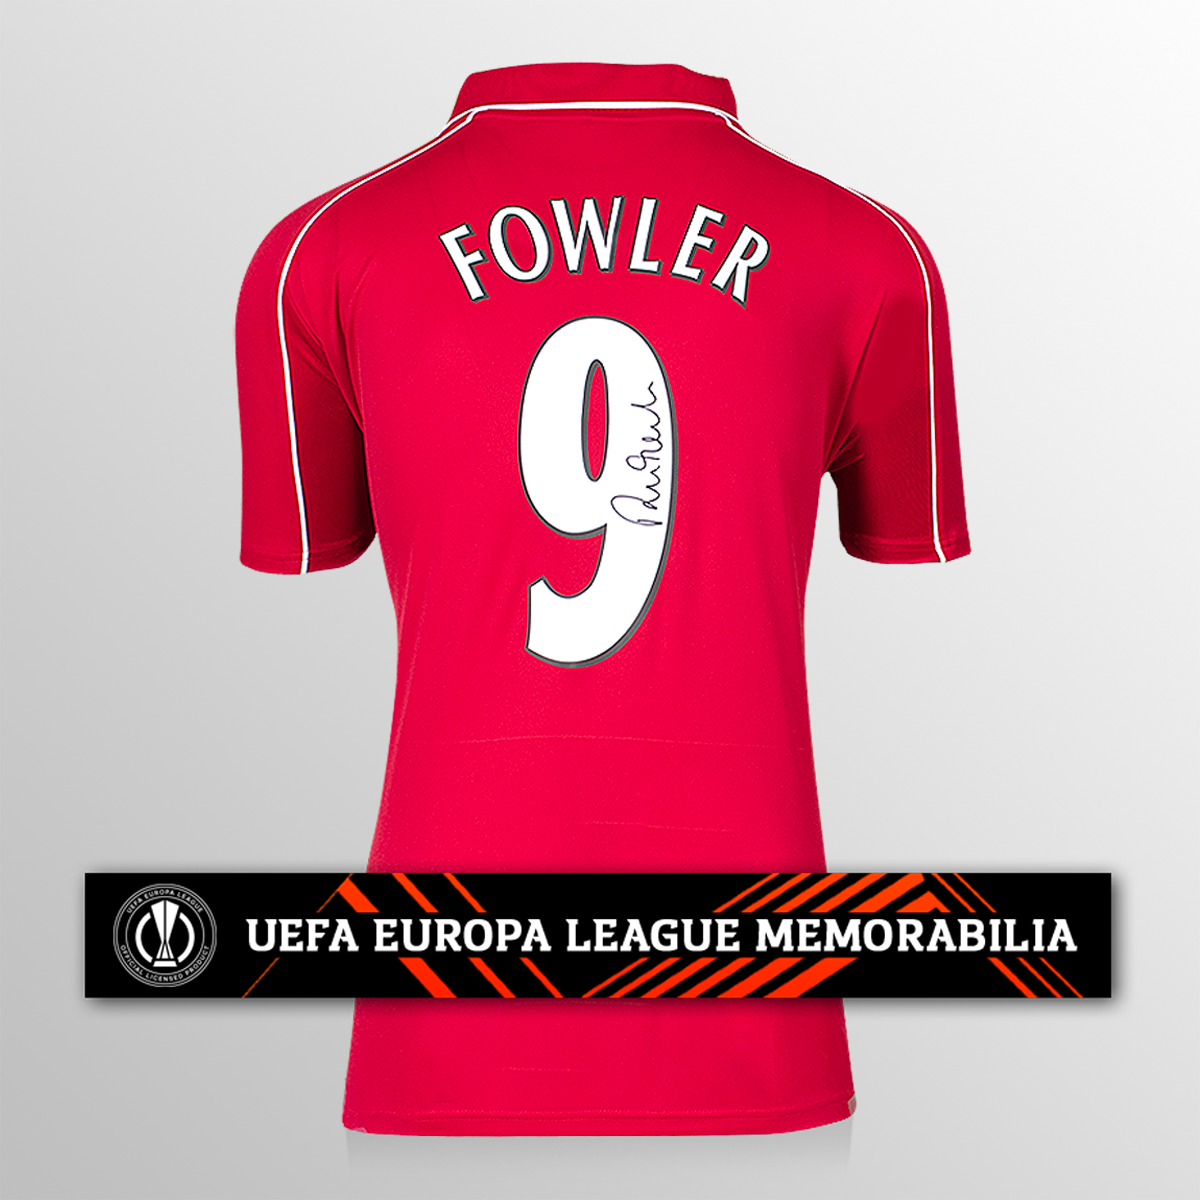 Robbie Fowler Official UEFA Europa League Back Signed Liverpool 2000-01 Home Shirt